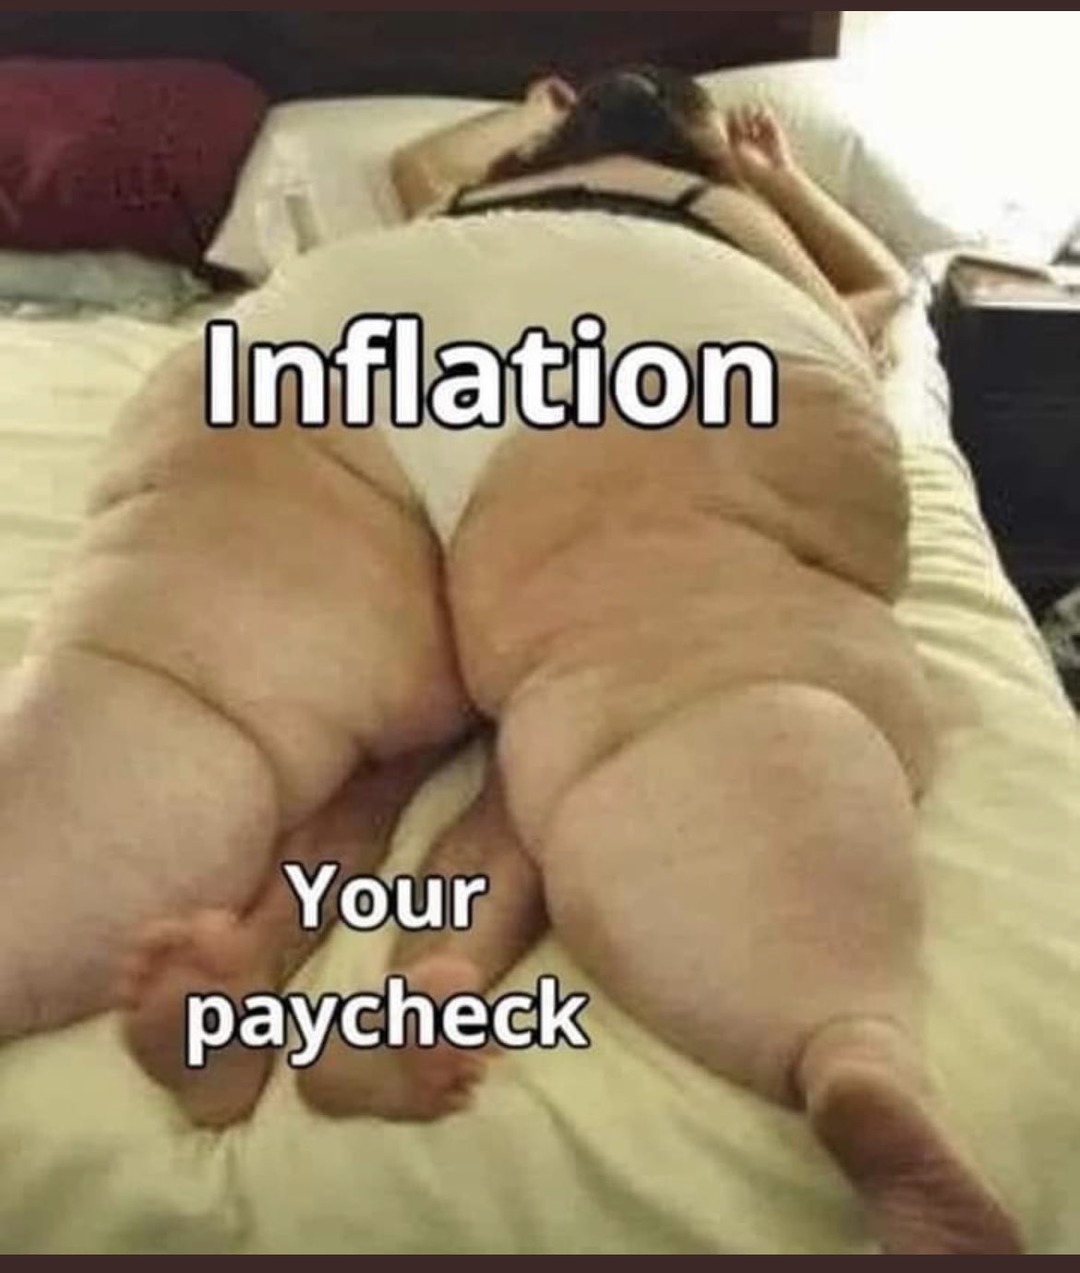 Inflation and Your Paycheck - meme